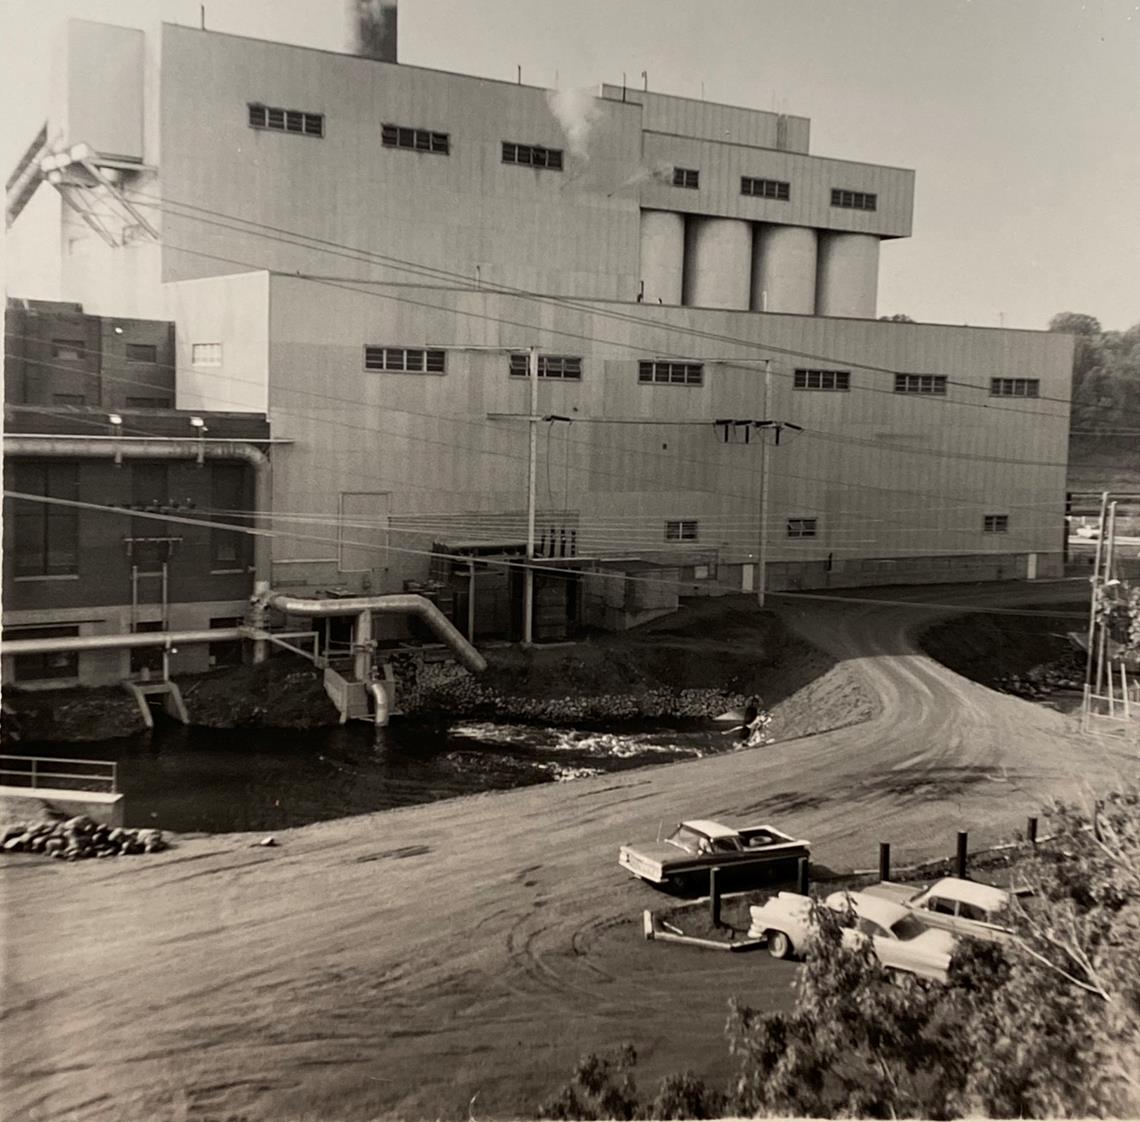 Hoot Lake Plant in 1971.